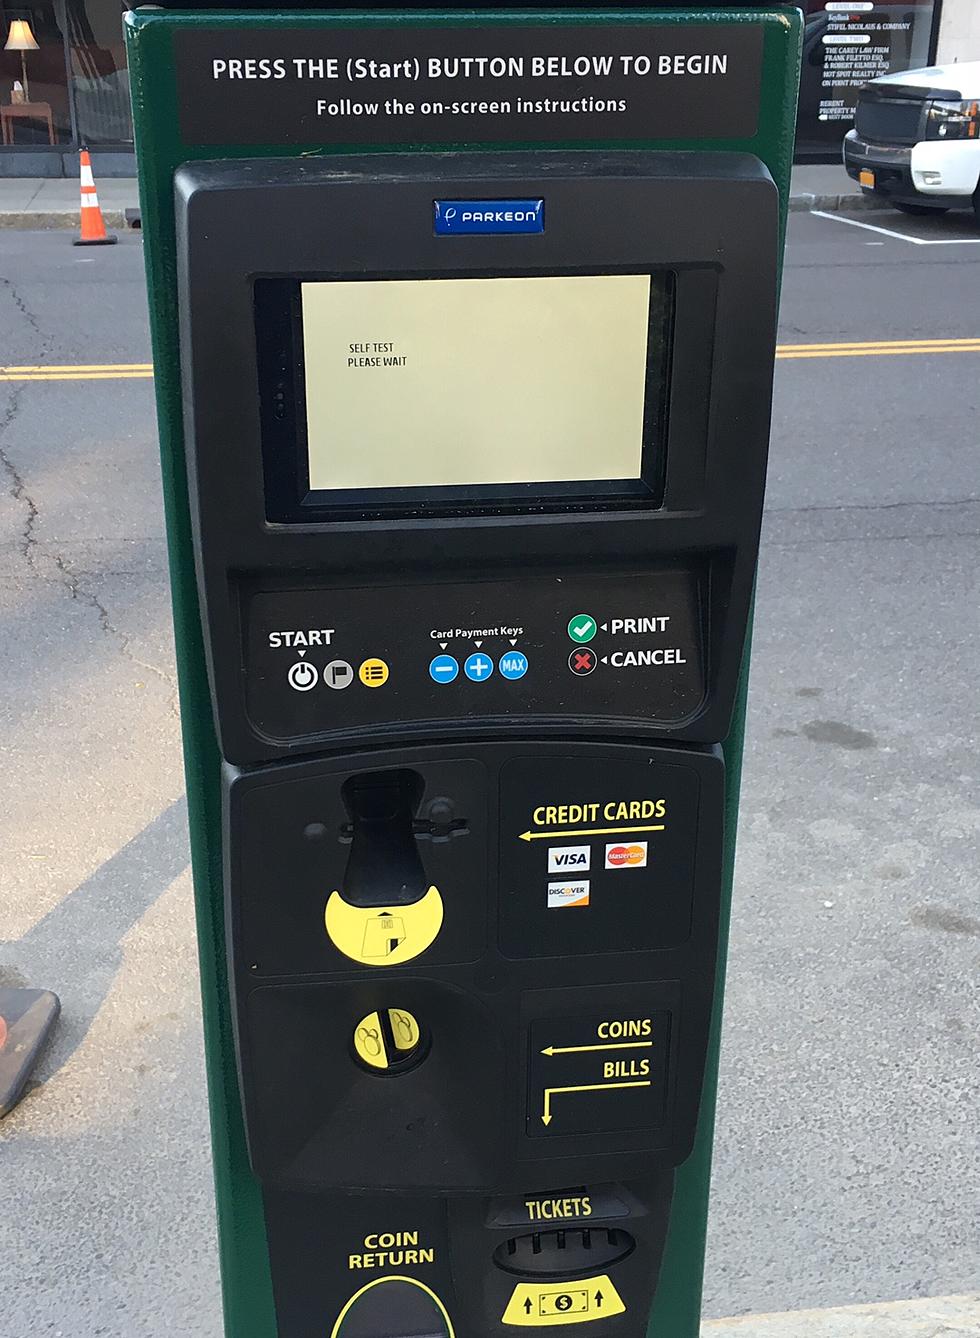 The New Parking Meter Kiosks Are Here